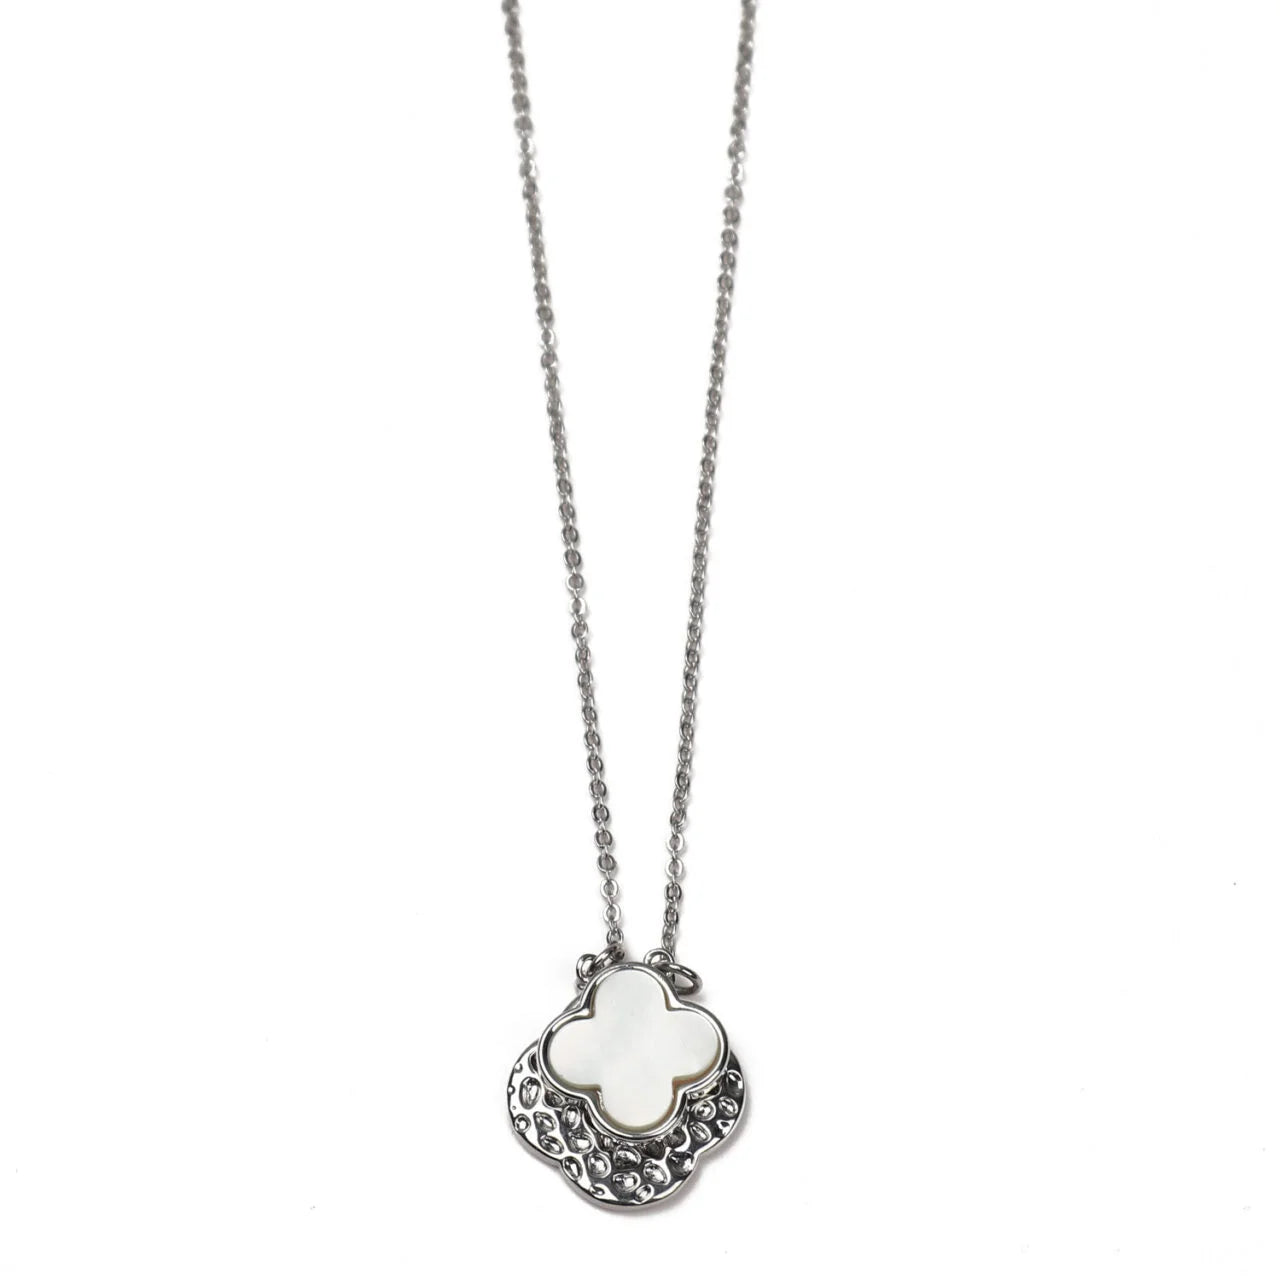 Fabulous Gifts Jewellery Necklace Double Clover White Silver by Weirs of Baggot Street